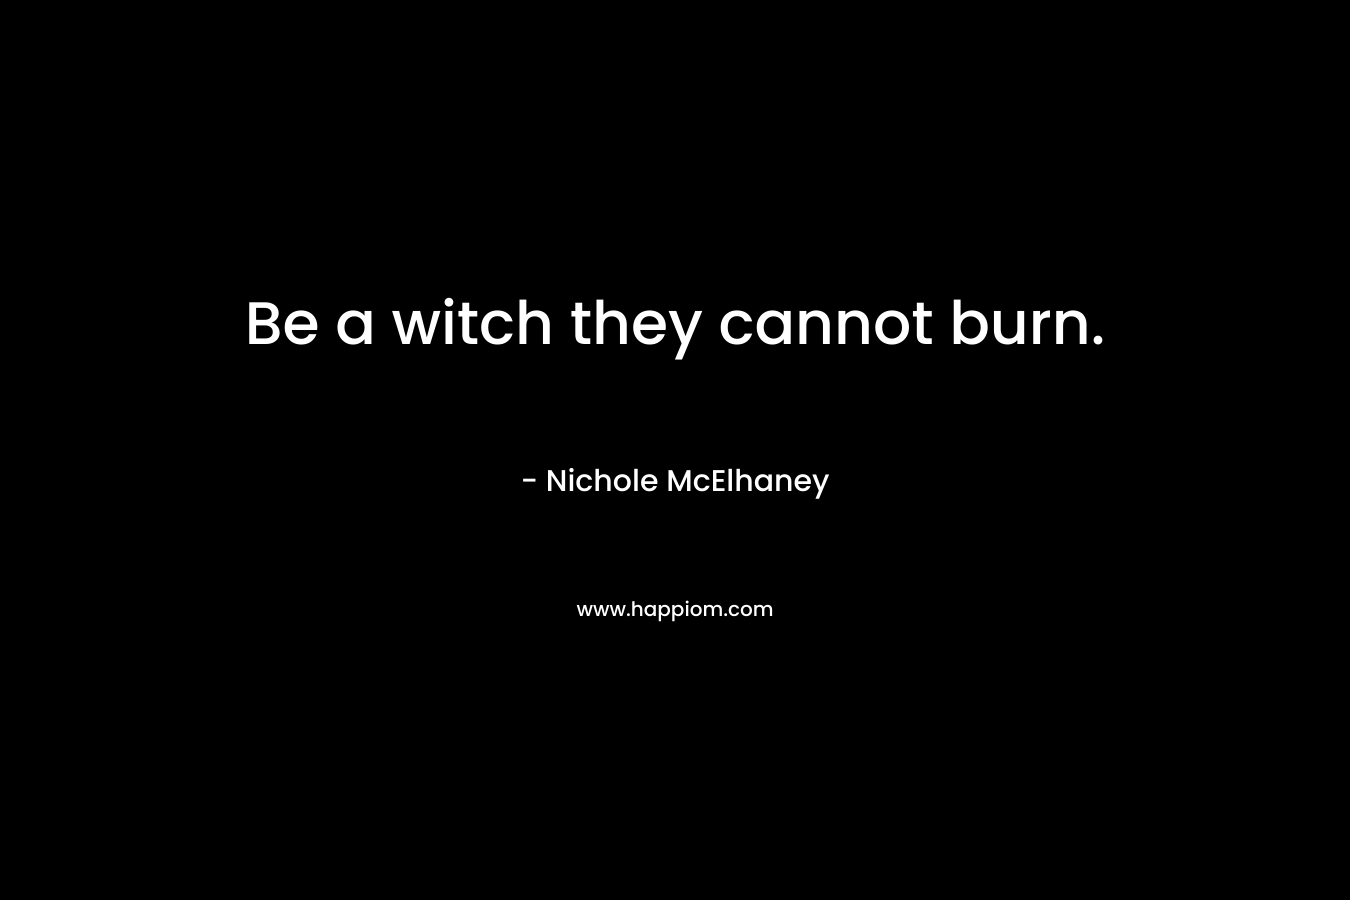 Be a witch they cannot burn.